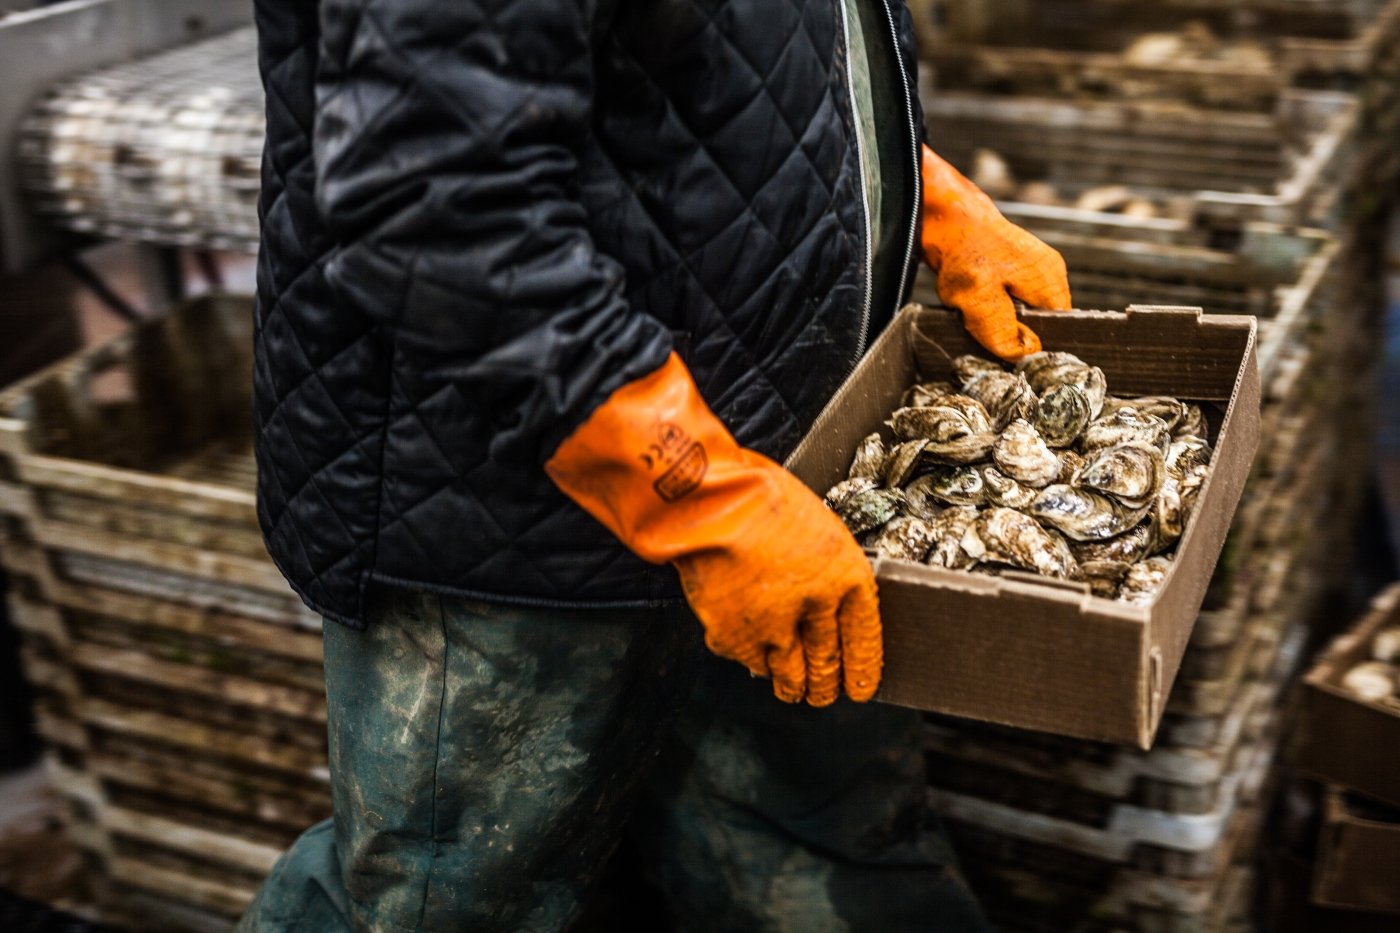 Person wearing orange rubber gloves and winter jacket moving flats of oysters outdoors